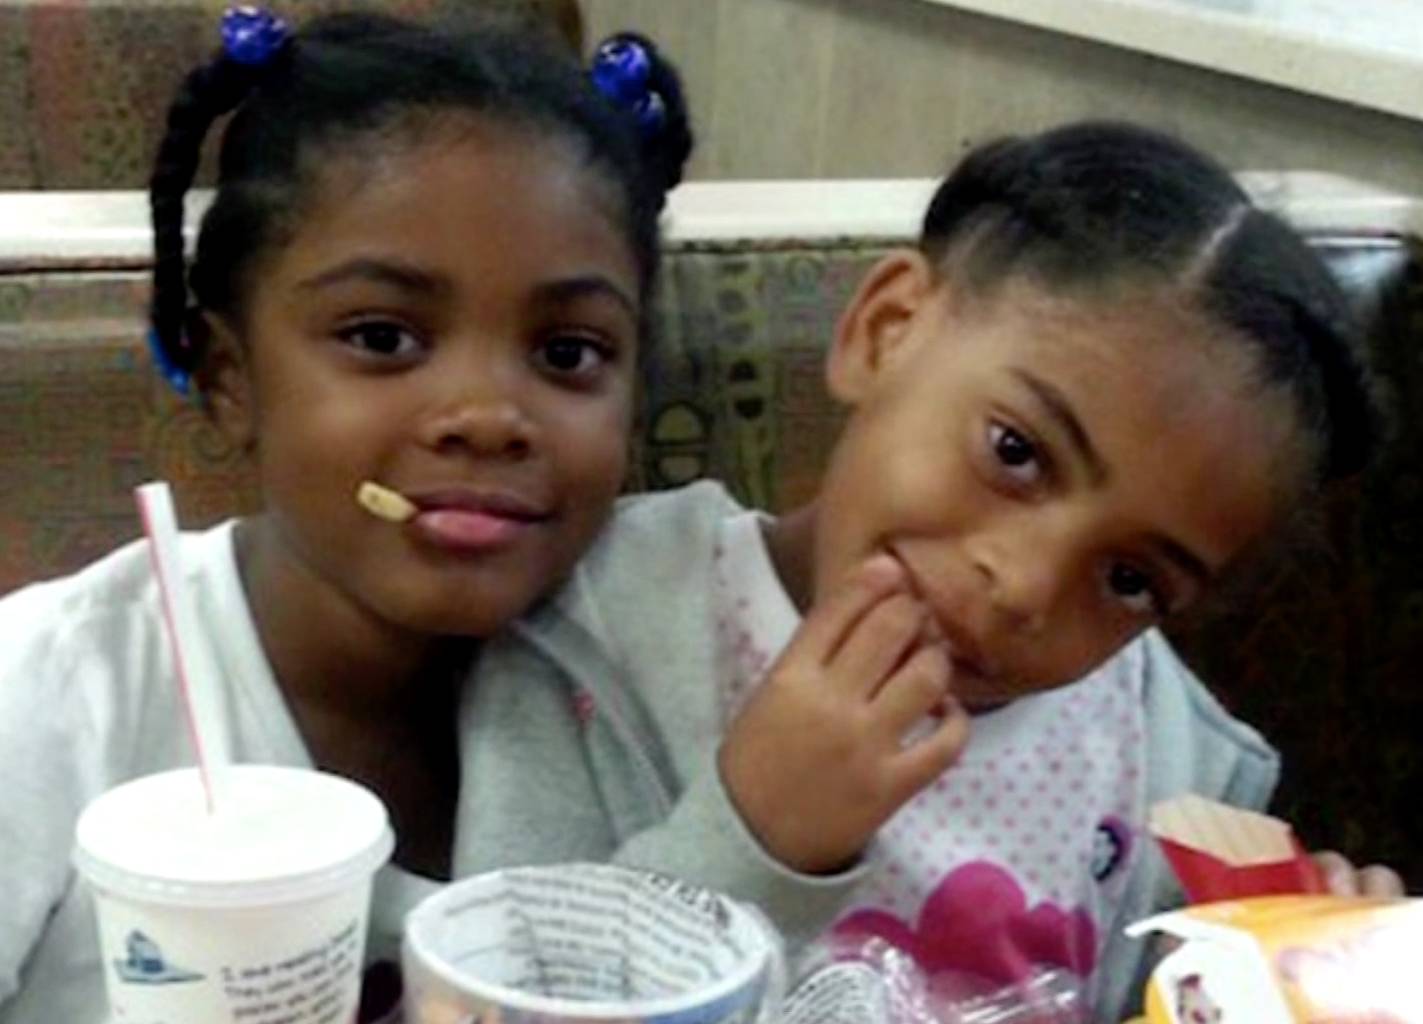 Details unveiled in death of two young Denver girls on BET News in 2018.